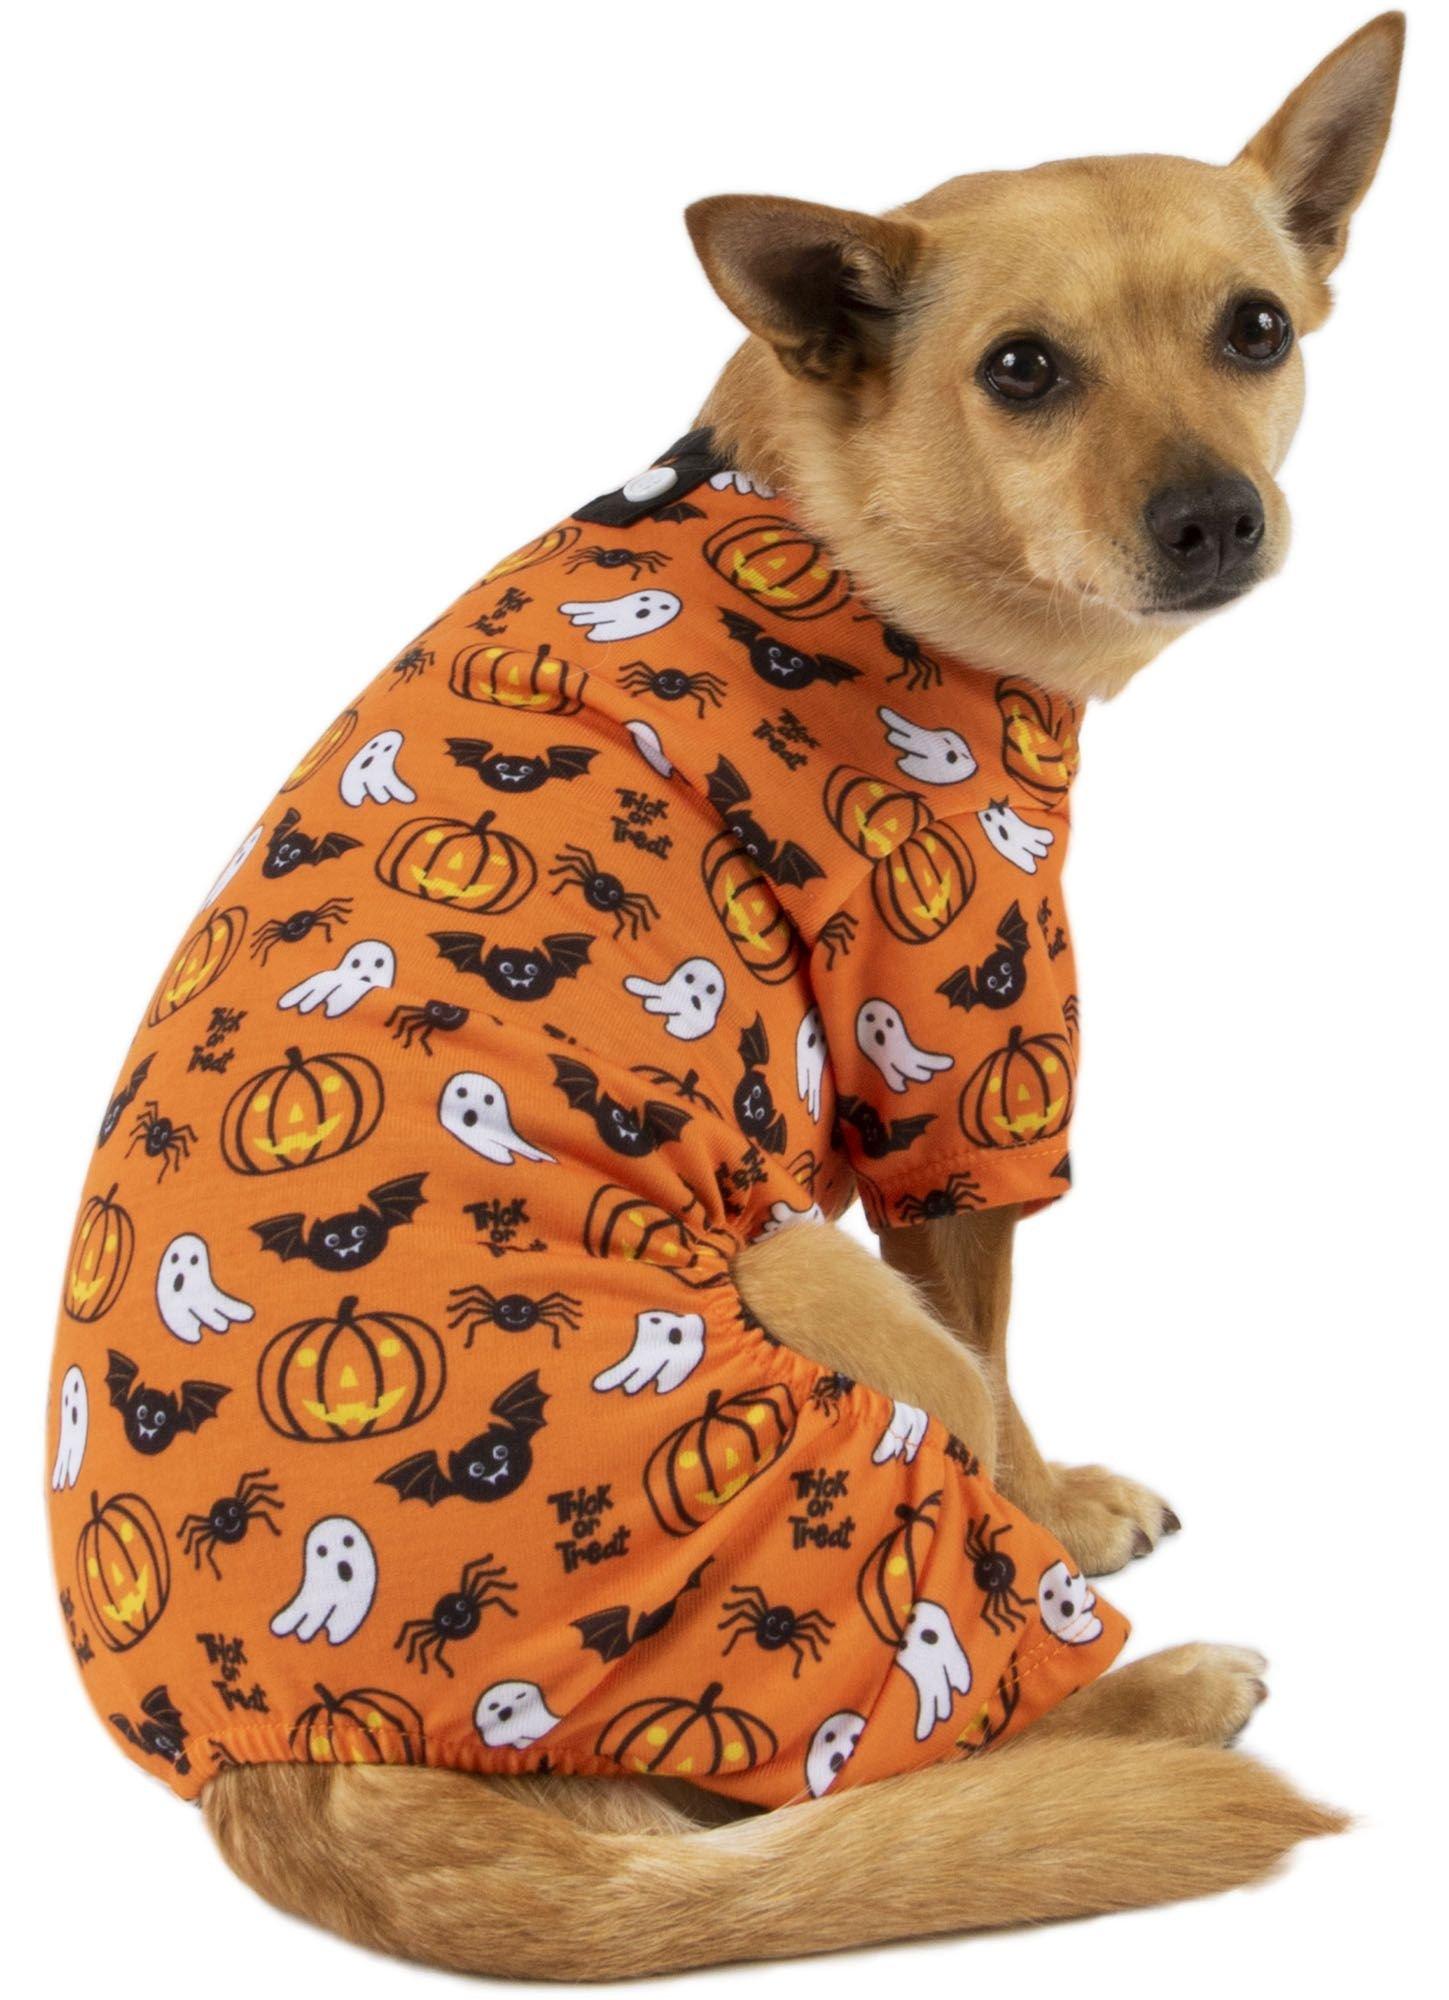 20 Best Halloween Pajamas for the Family, Including the Dog